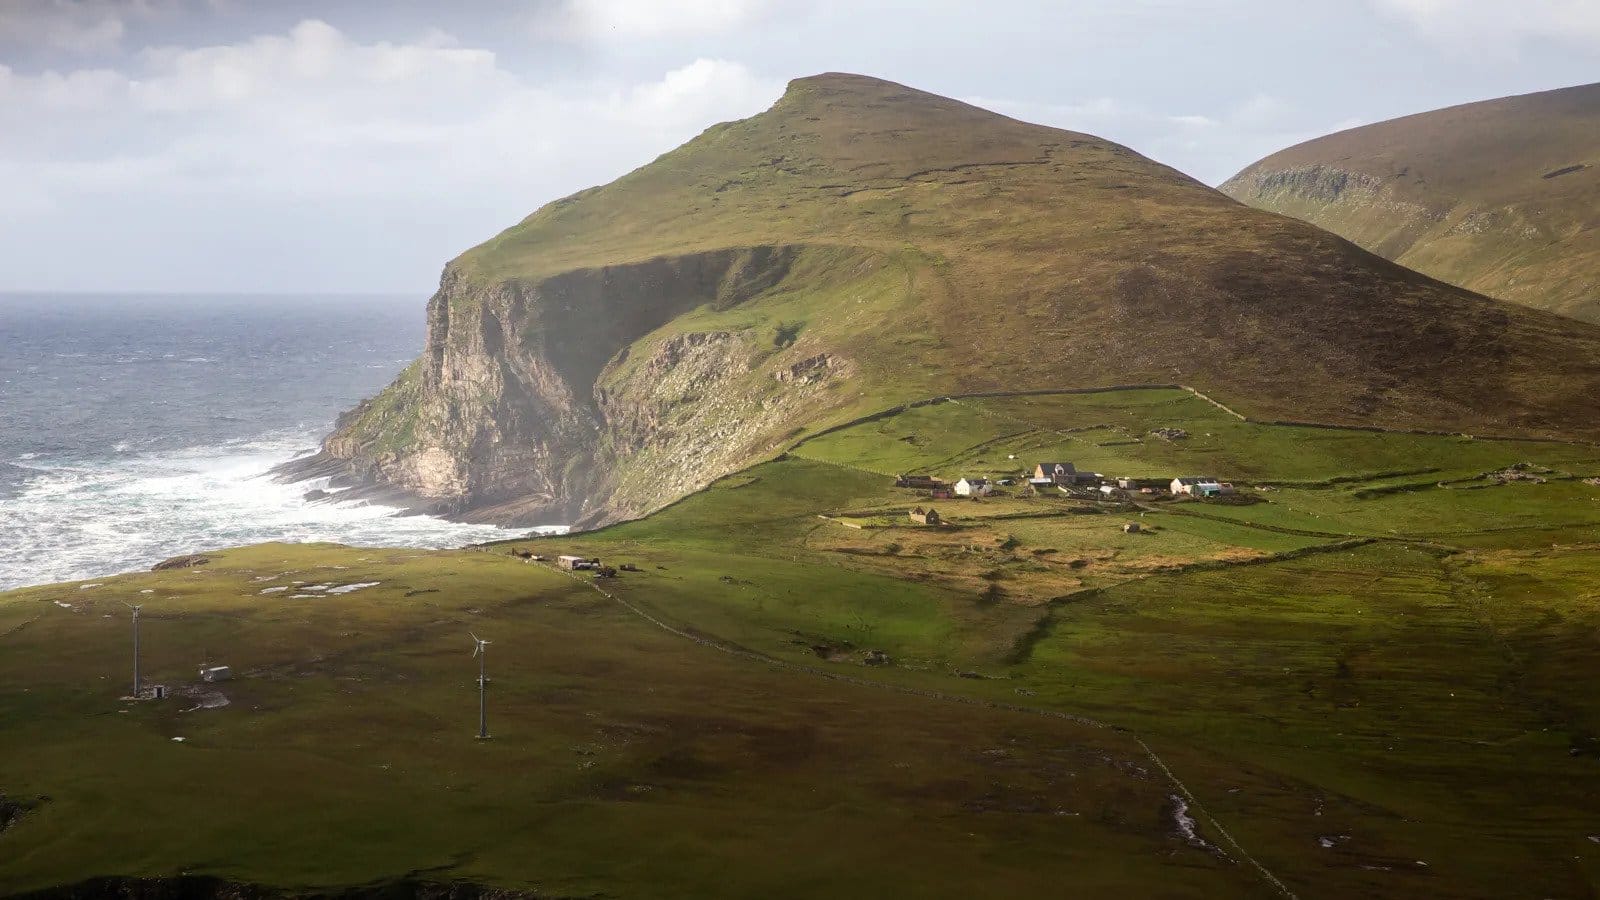 Britain's most remote inhabited island - a paradise for introverts or not?